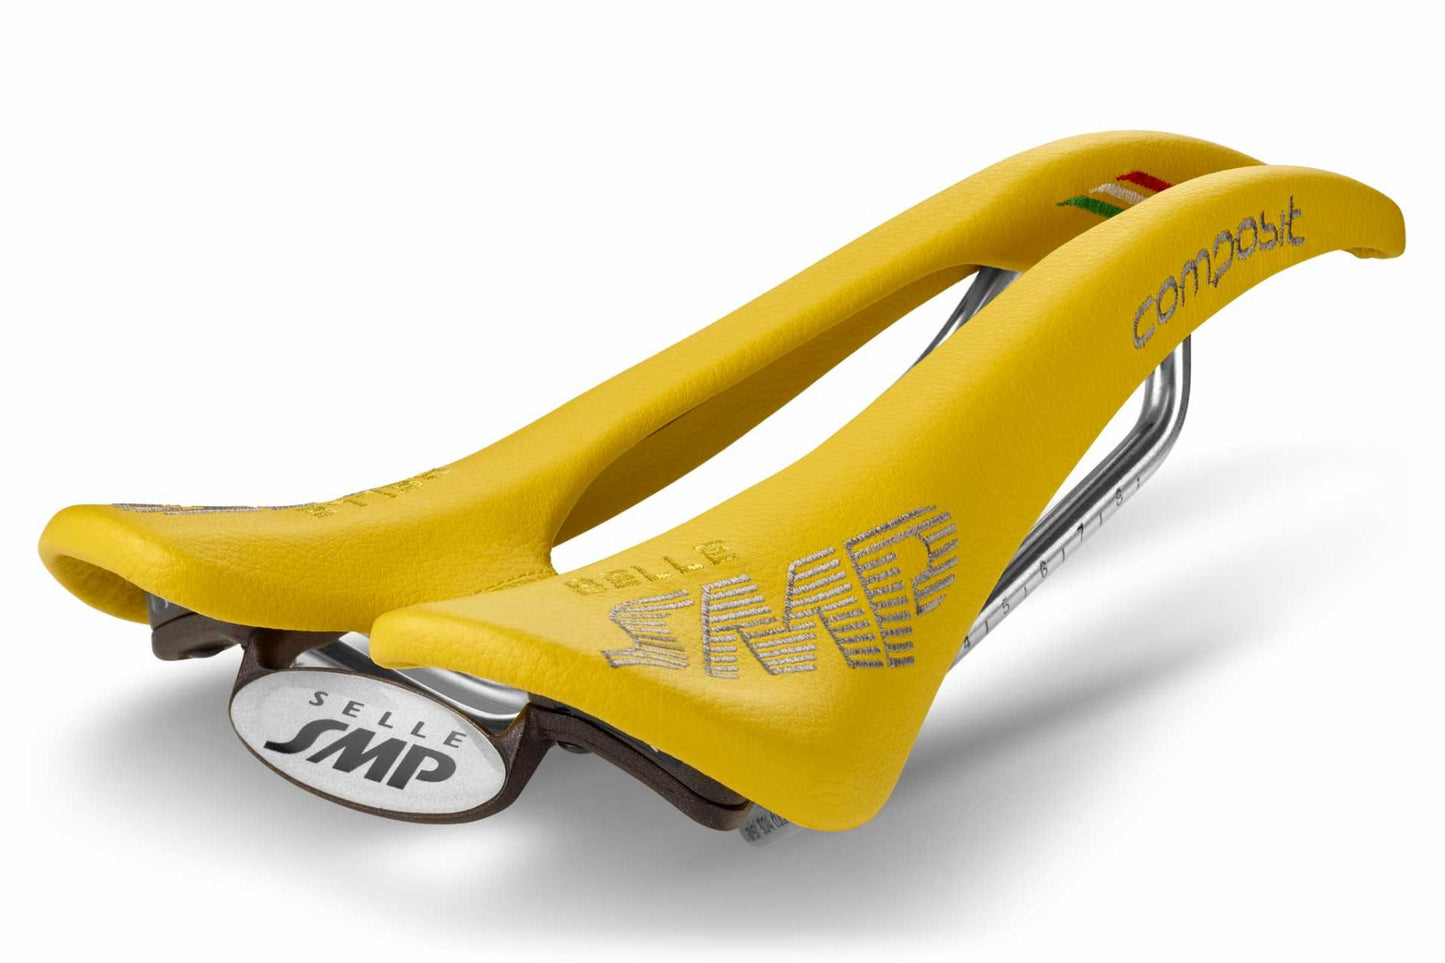 Selle SMP Composit Saddle with Steel Rails (Yellow)